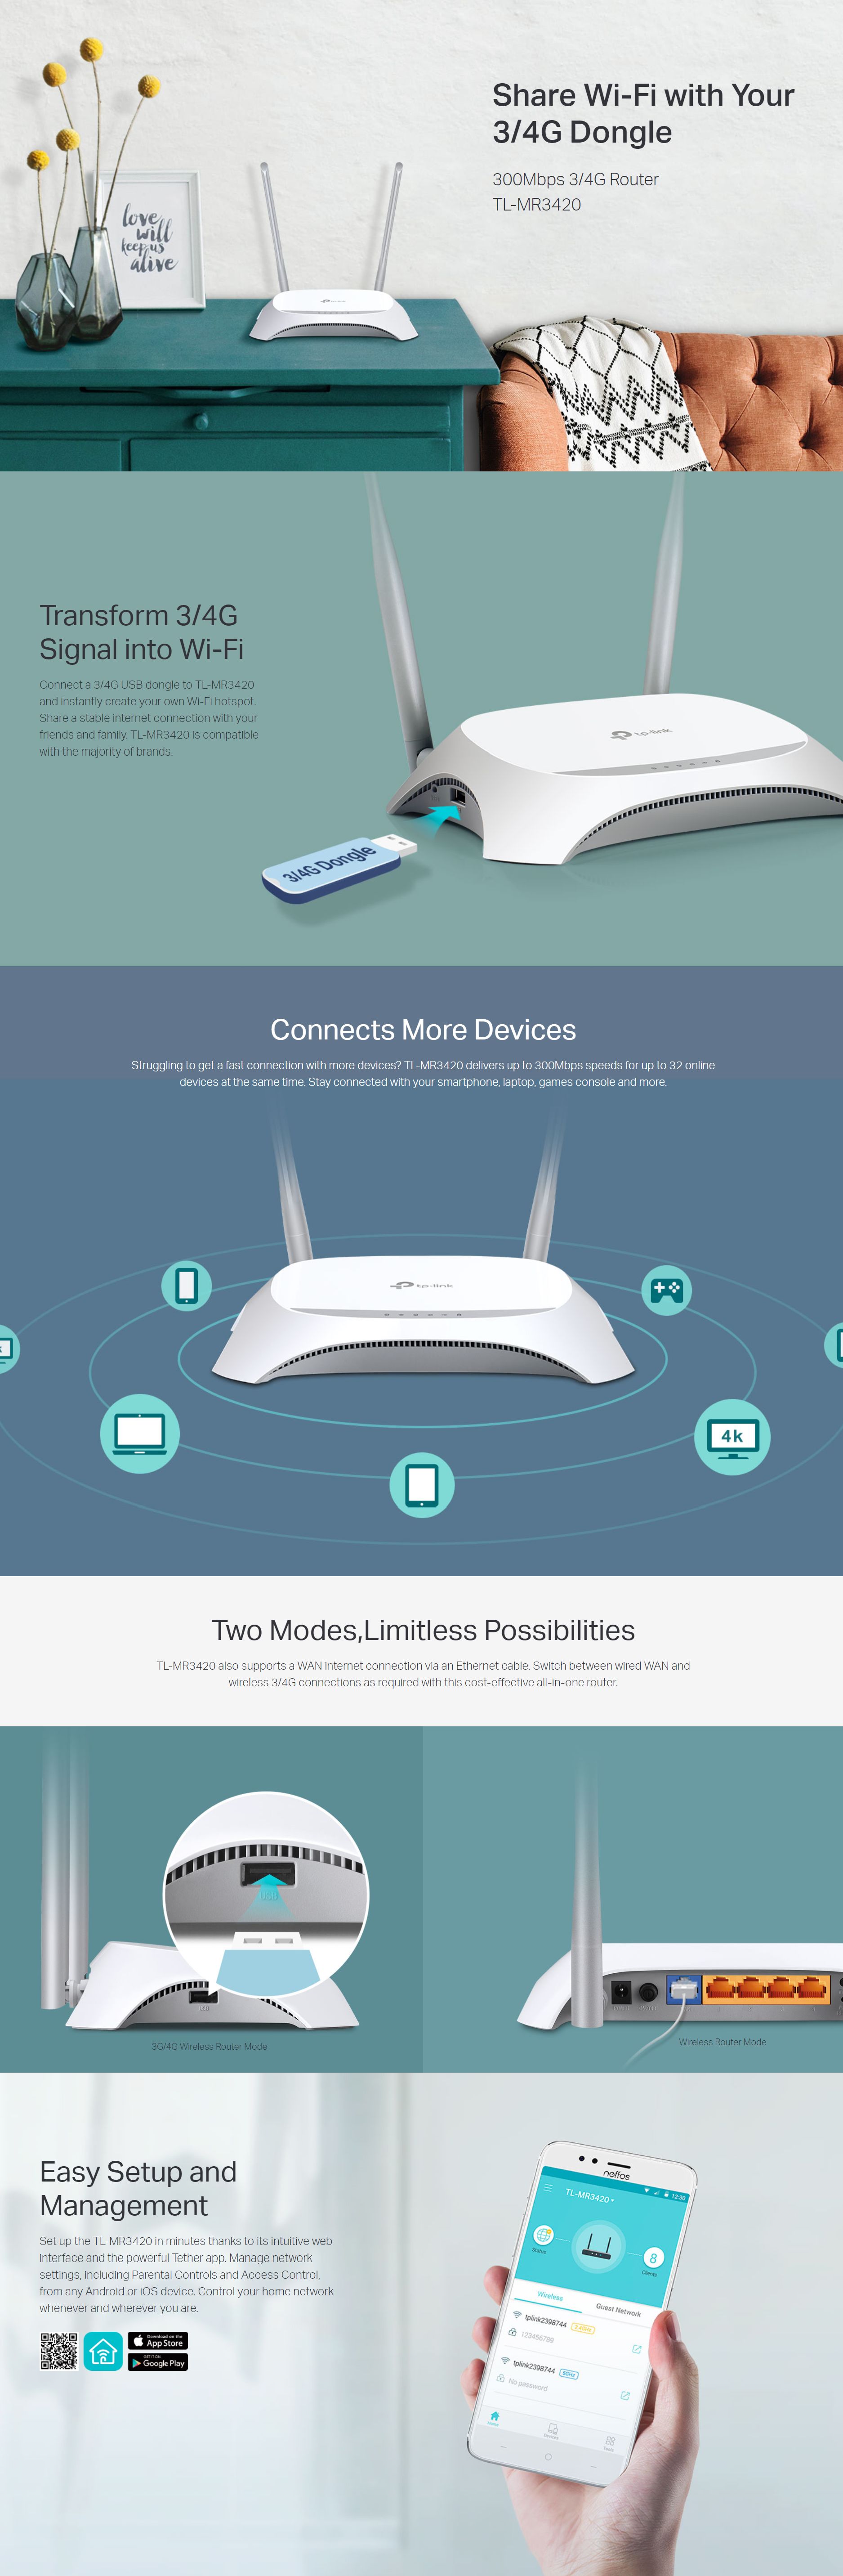 TP-Link 300Mbps Wireless N 3G Router (TL-MR3420)